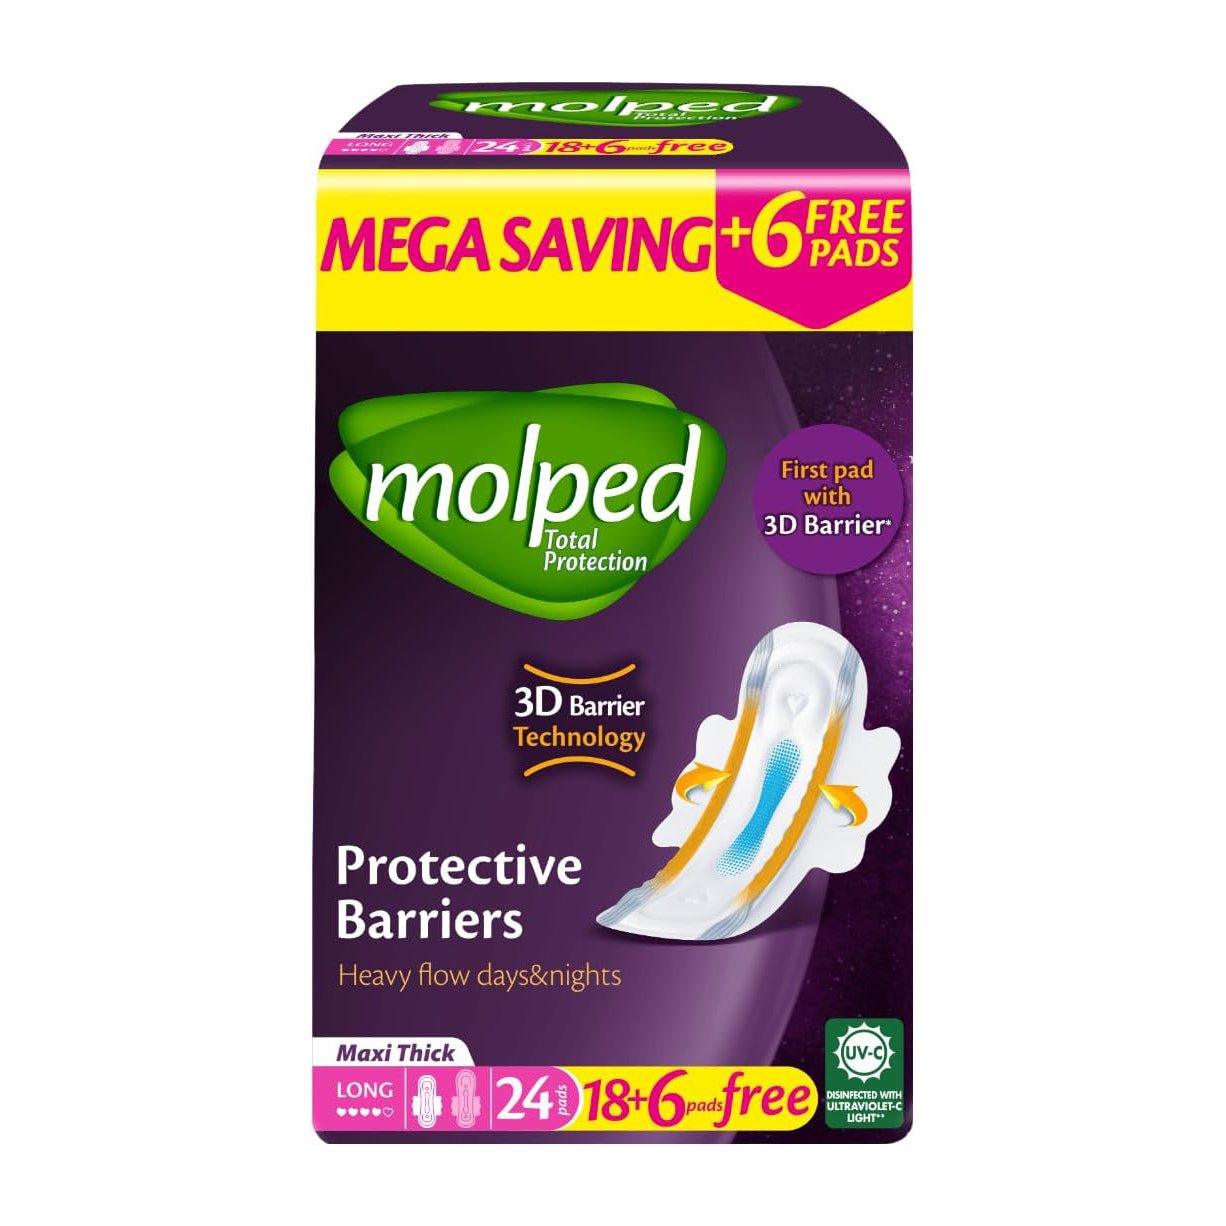 Molped Mega Saving Protective Barriers Maxi Thick Long Pads – 24 Pads - Bloom Pharmacy